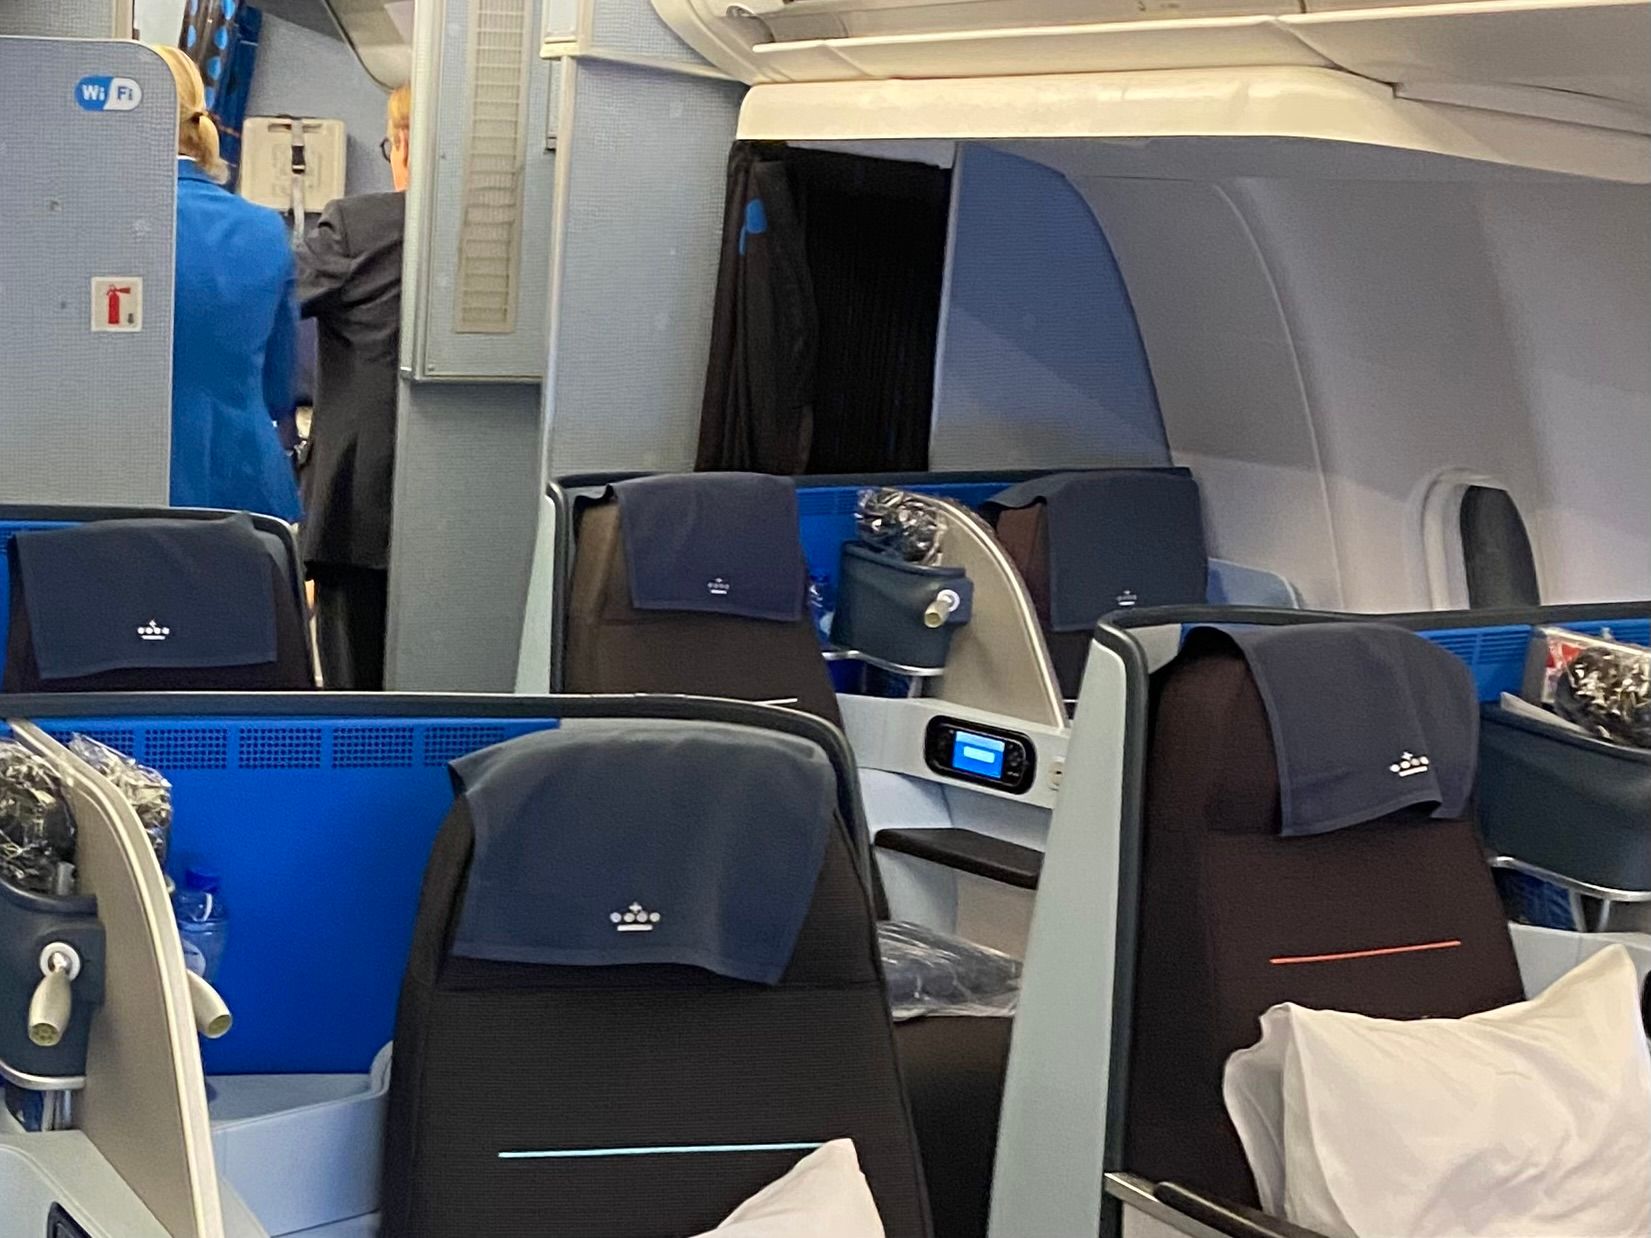 Airbus A330-200 Business class seats reserved as crew rest area